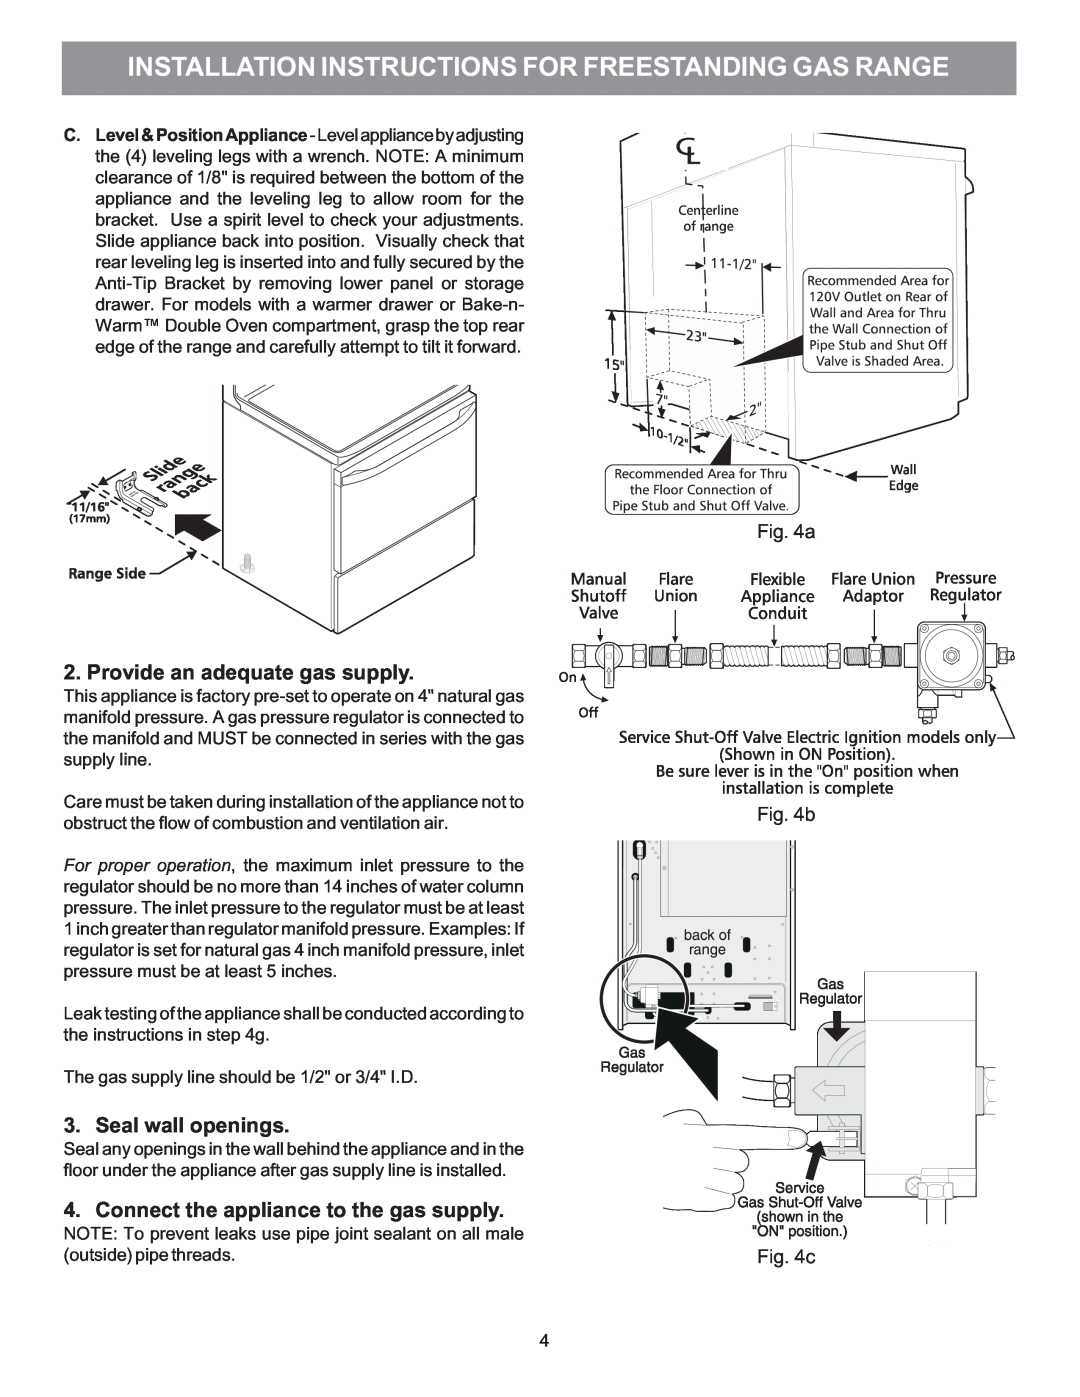 Electrolux 316469104 Provide an adequate gas supply, Seal wall openings, Connect the appliance to the gas supply, a b c 